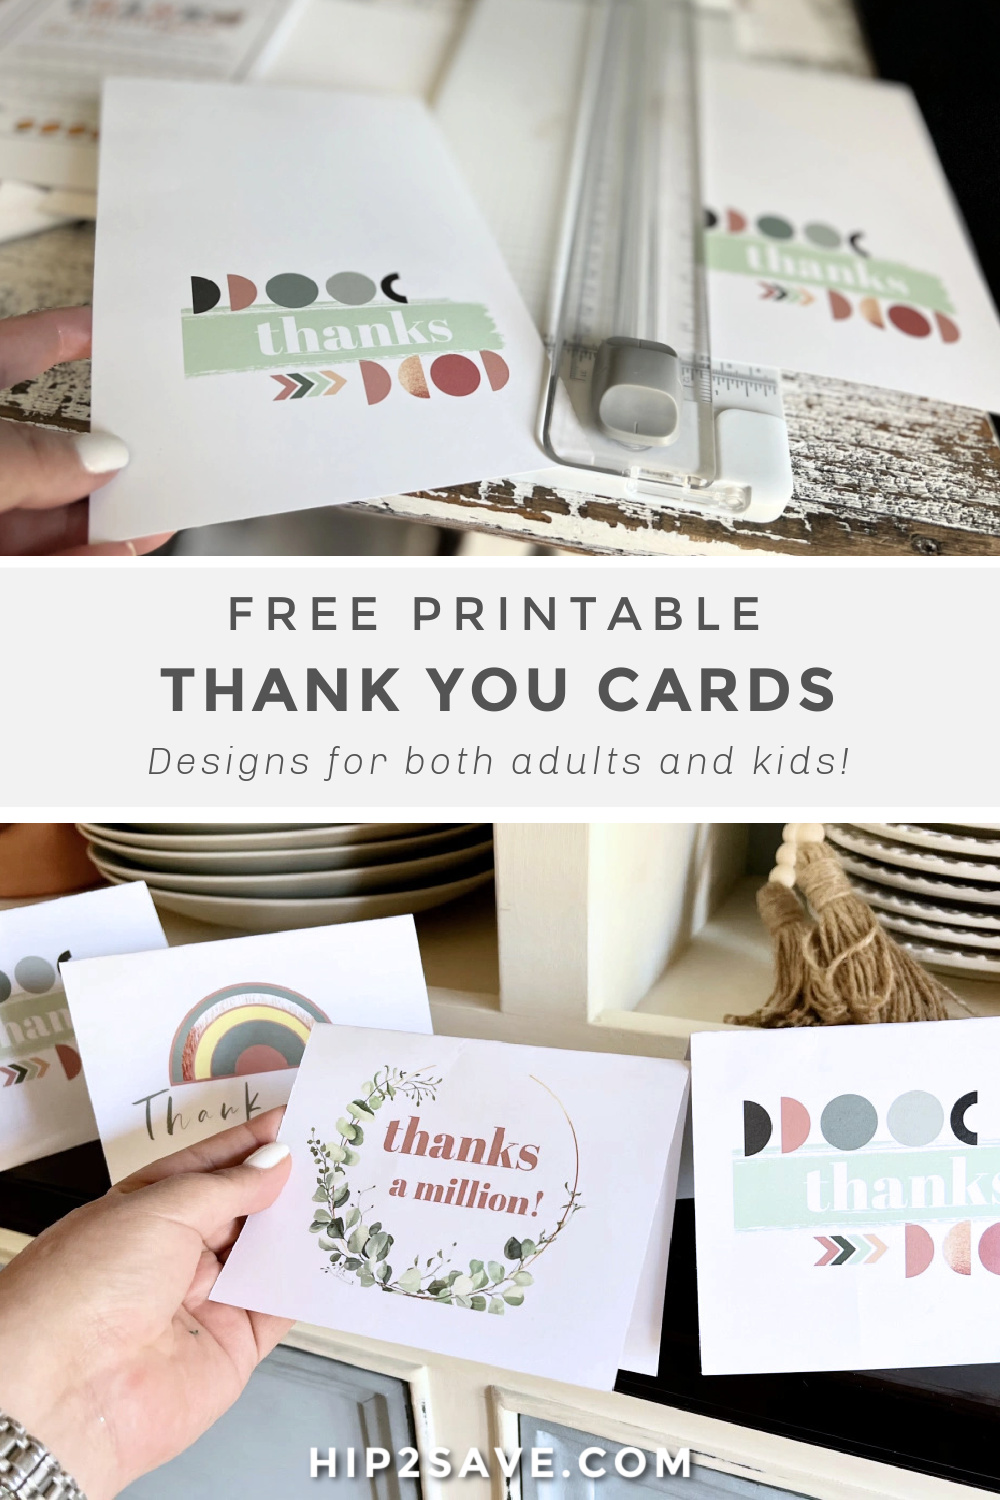 Show Your Gratitude With These Free Printable Thank You Cards!